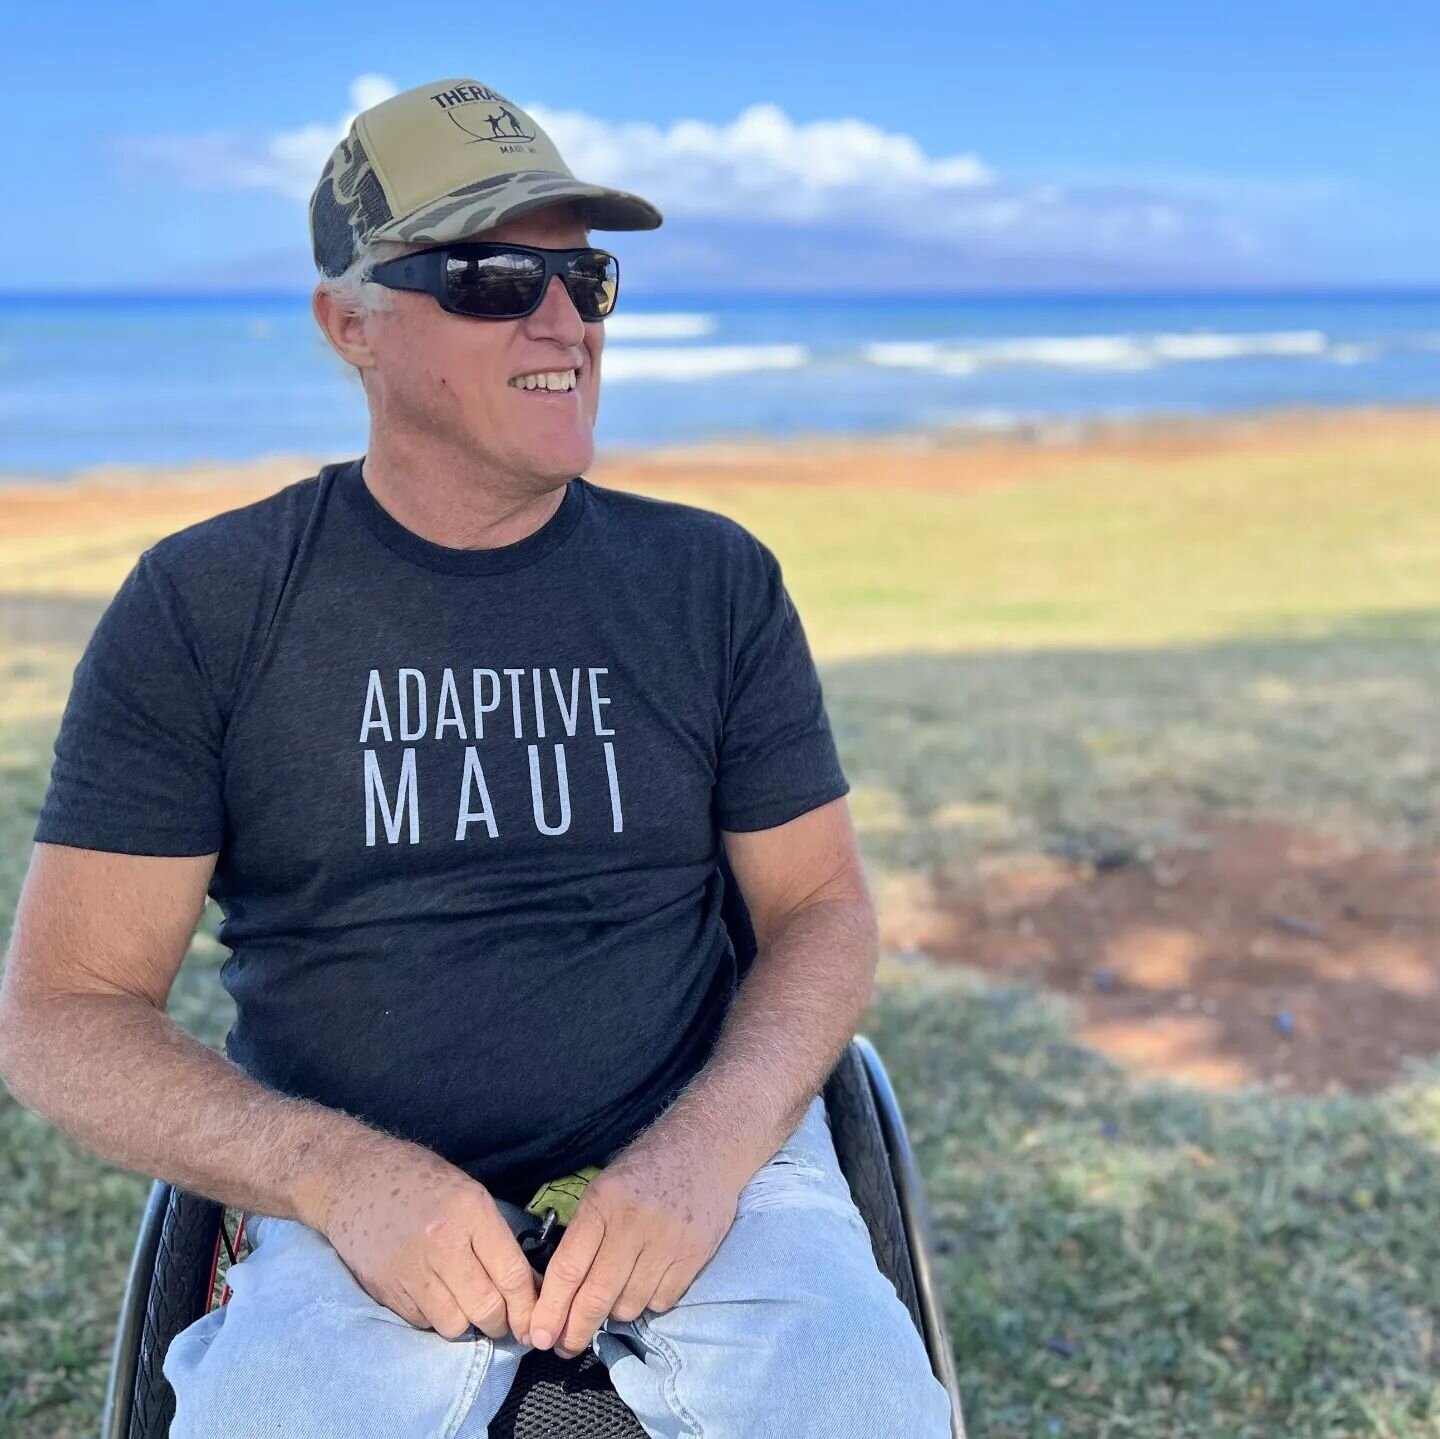 The Adaptive Maui shop is finally up on our website! We have a few items to choose from. All proceeds go to support getting more people on Maui into the outdoors. If you purchase any @hawaiiadaptivesurfteam logo wear, the proceed from that directly b